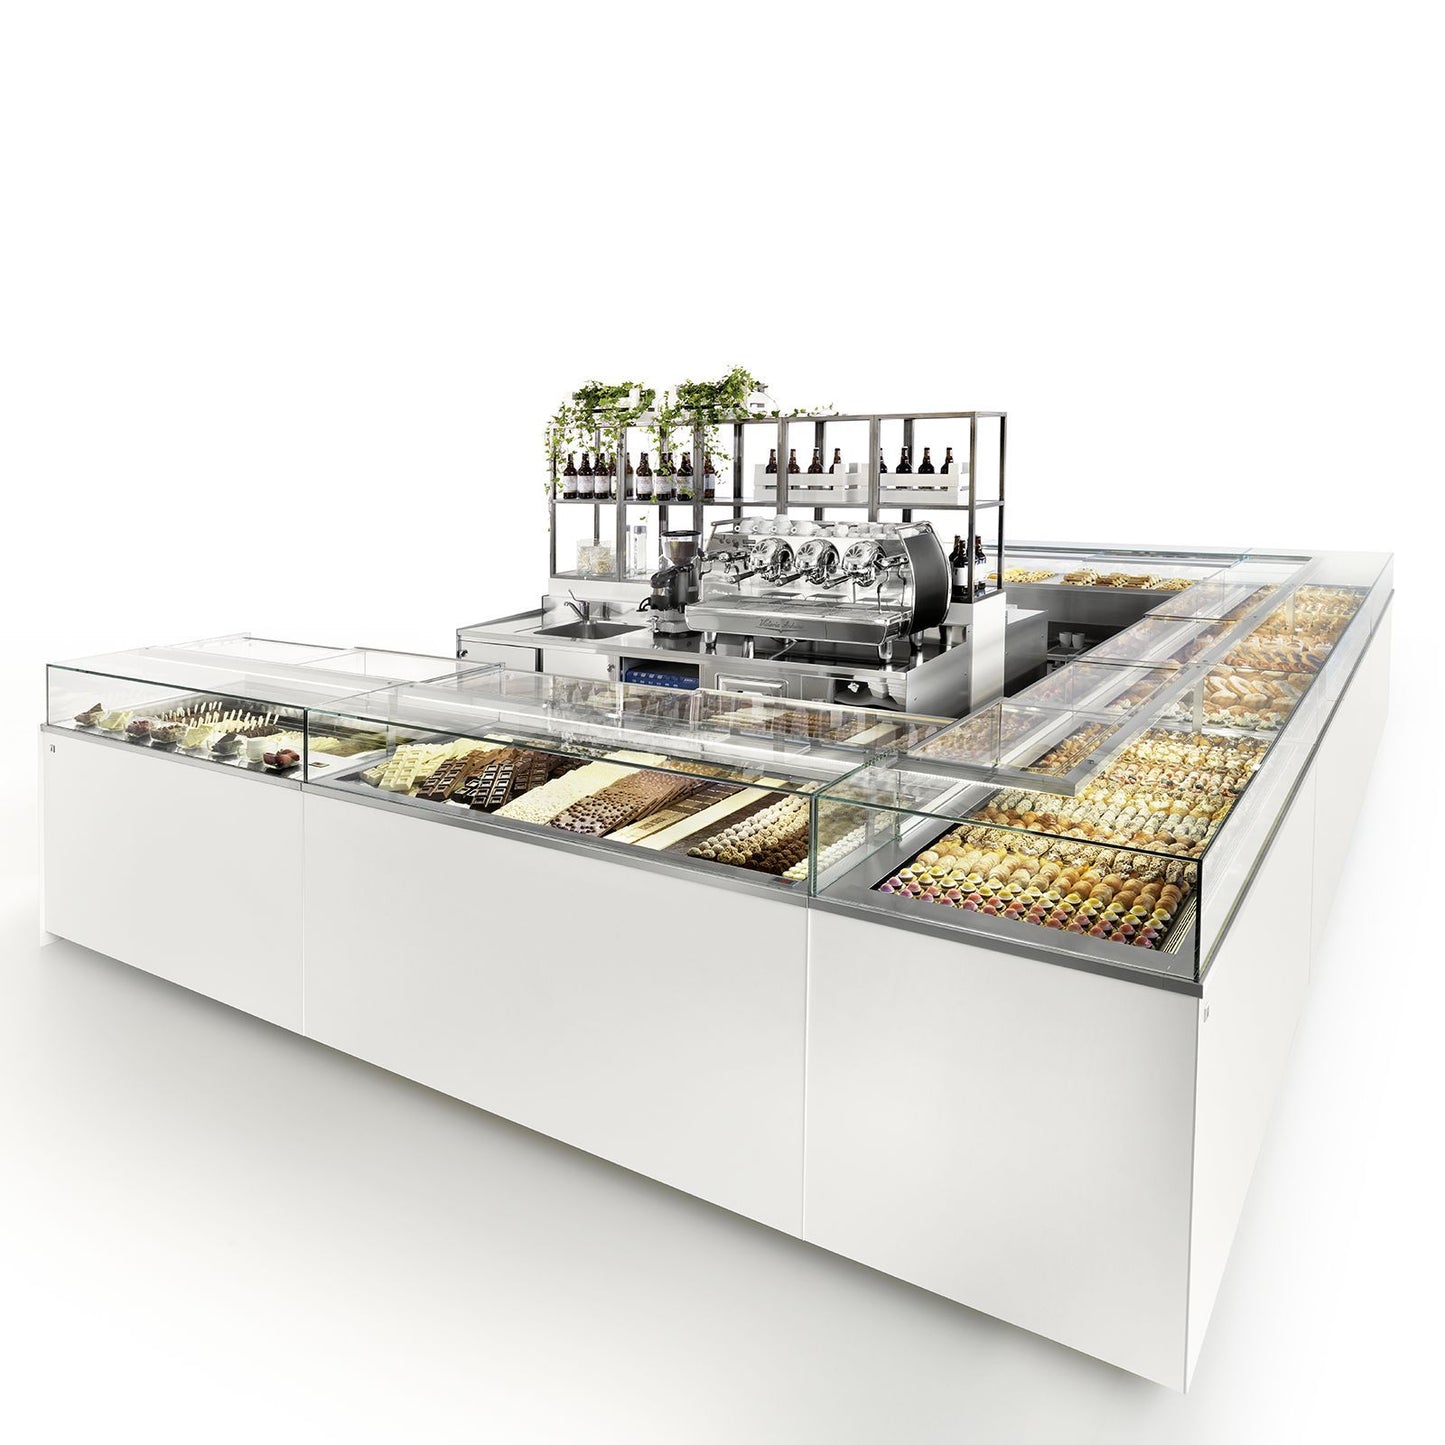 IFI Drop-In Delice Chocolate/Pastry Display Case